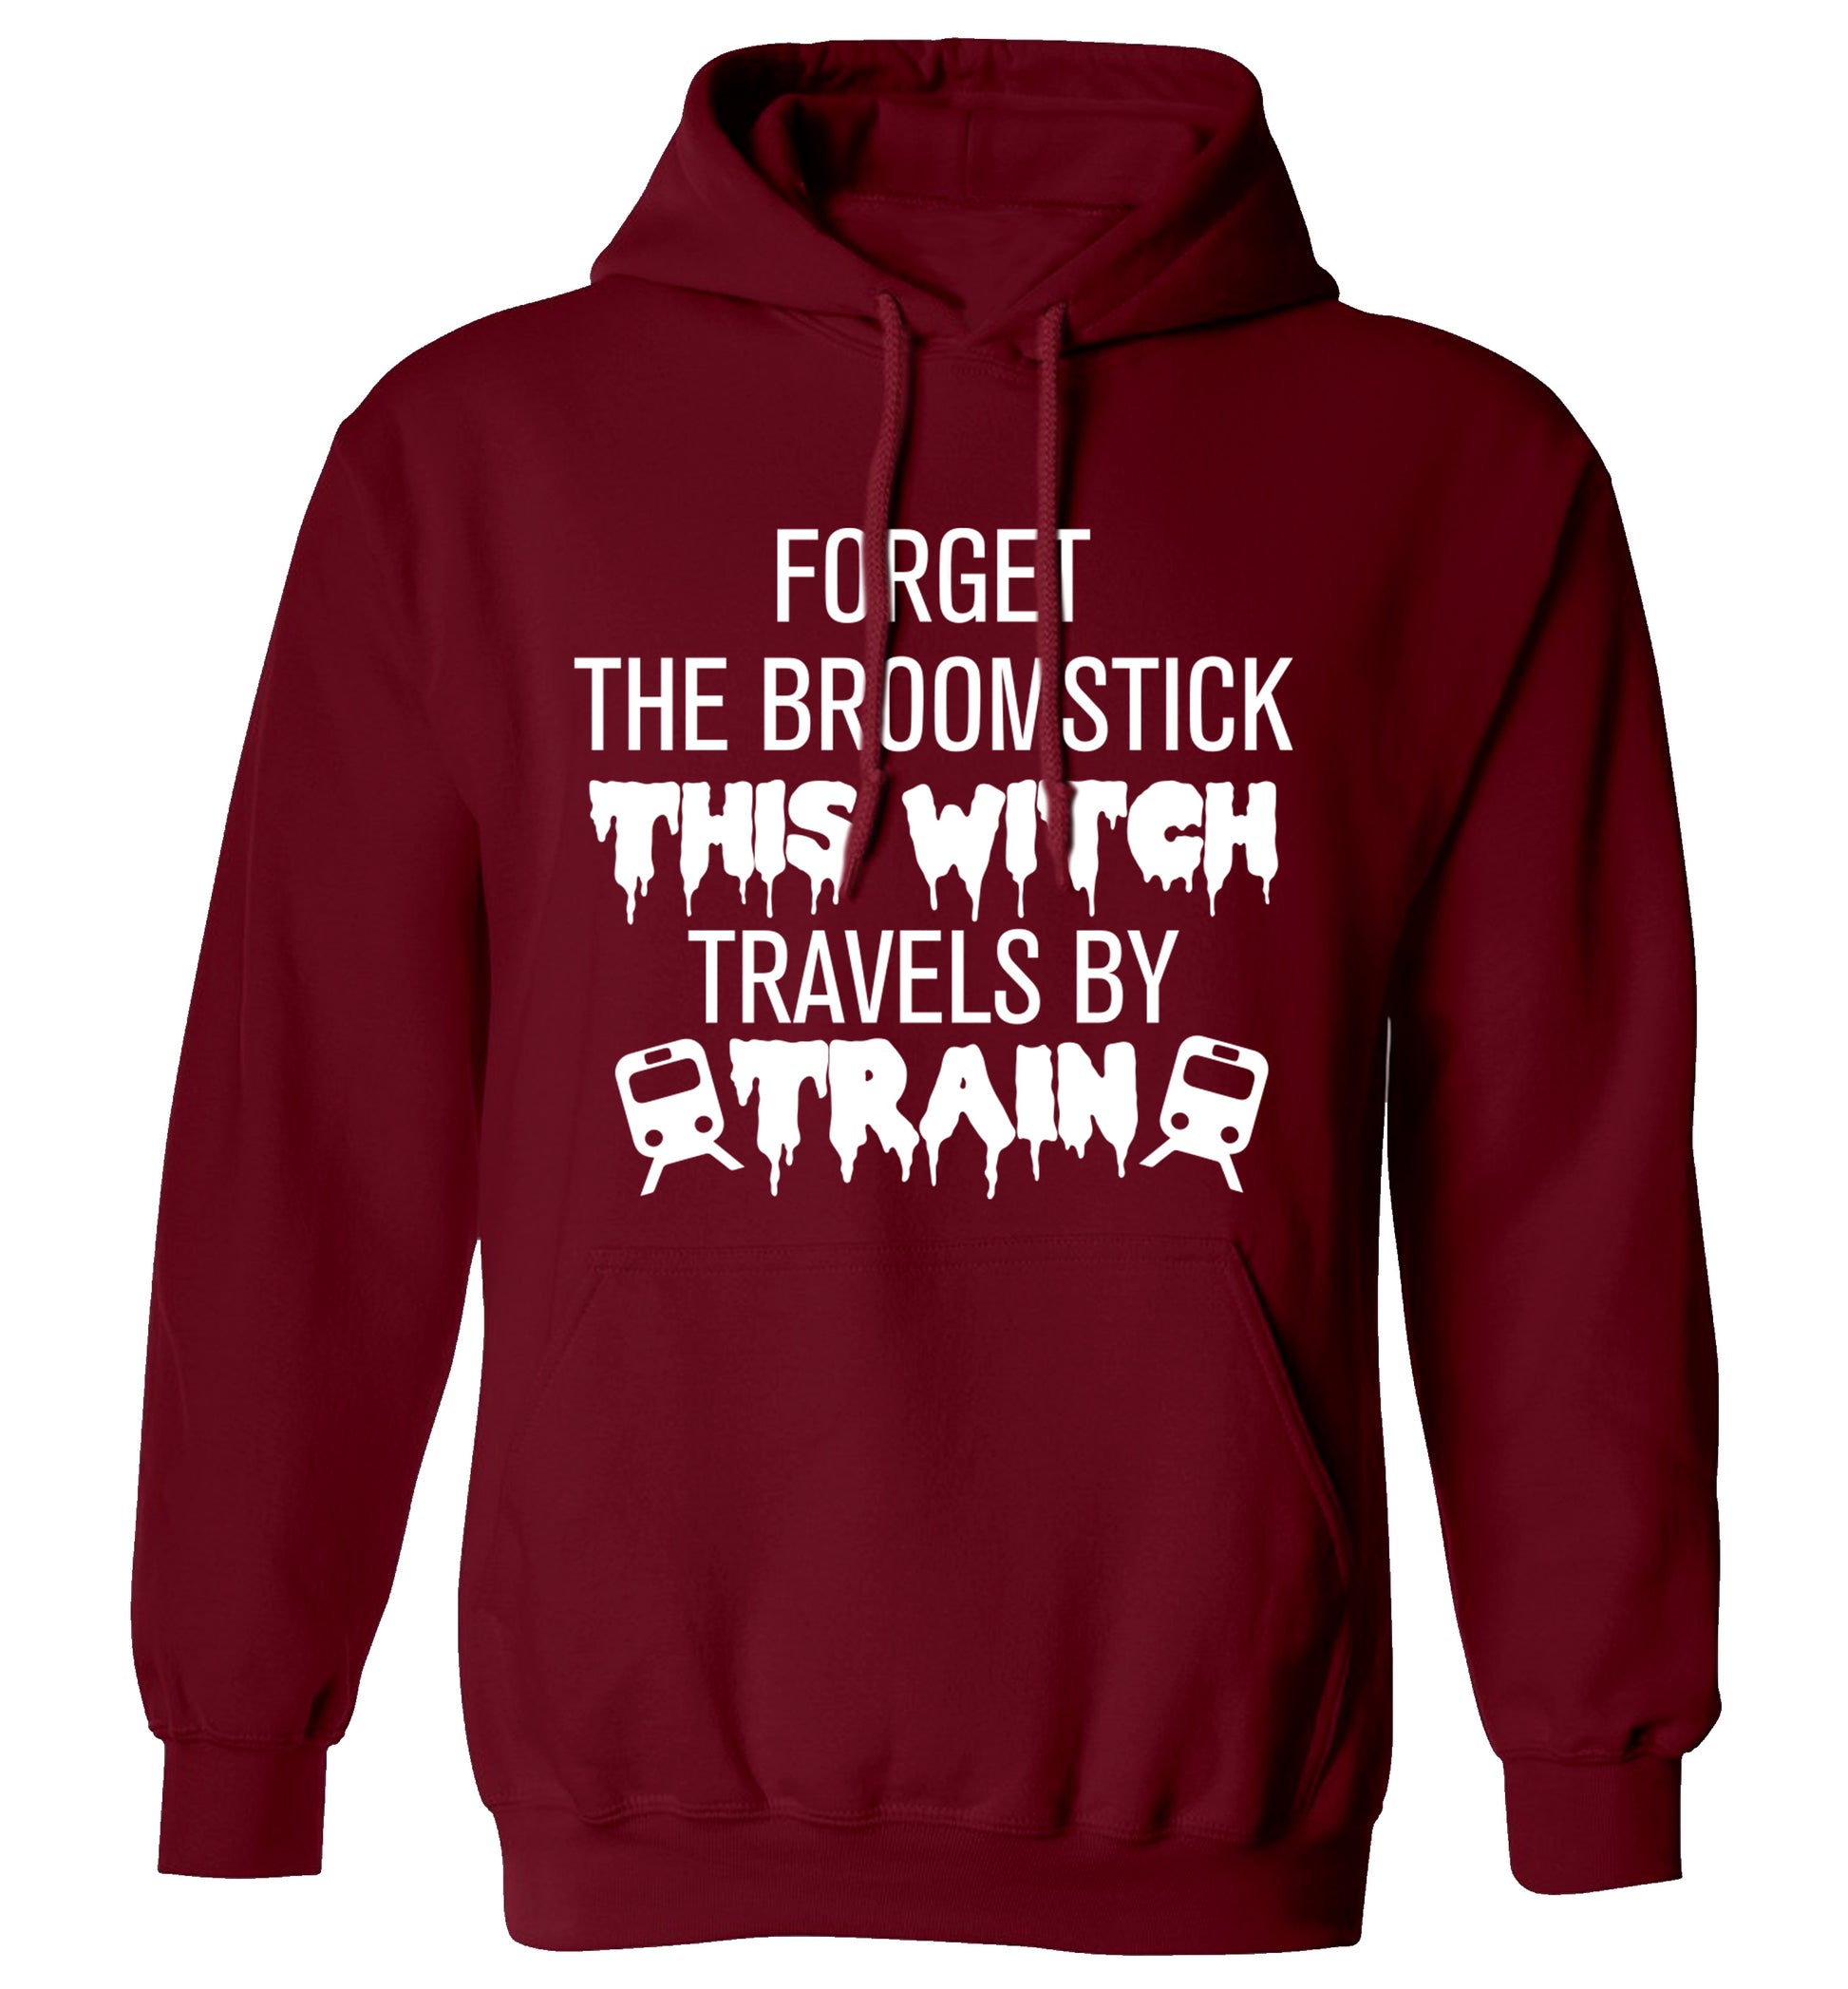 Forget the broomstick this witch travels by train adults unisexmaroon hoodie 2XL